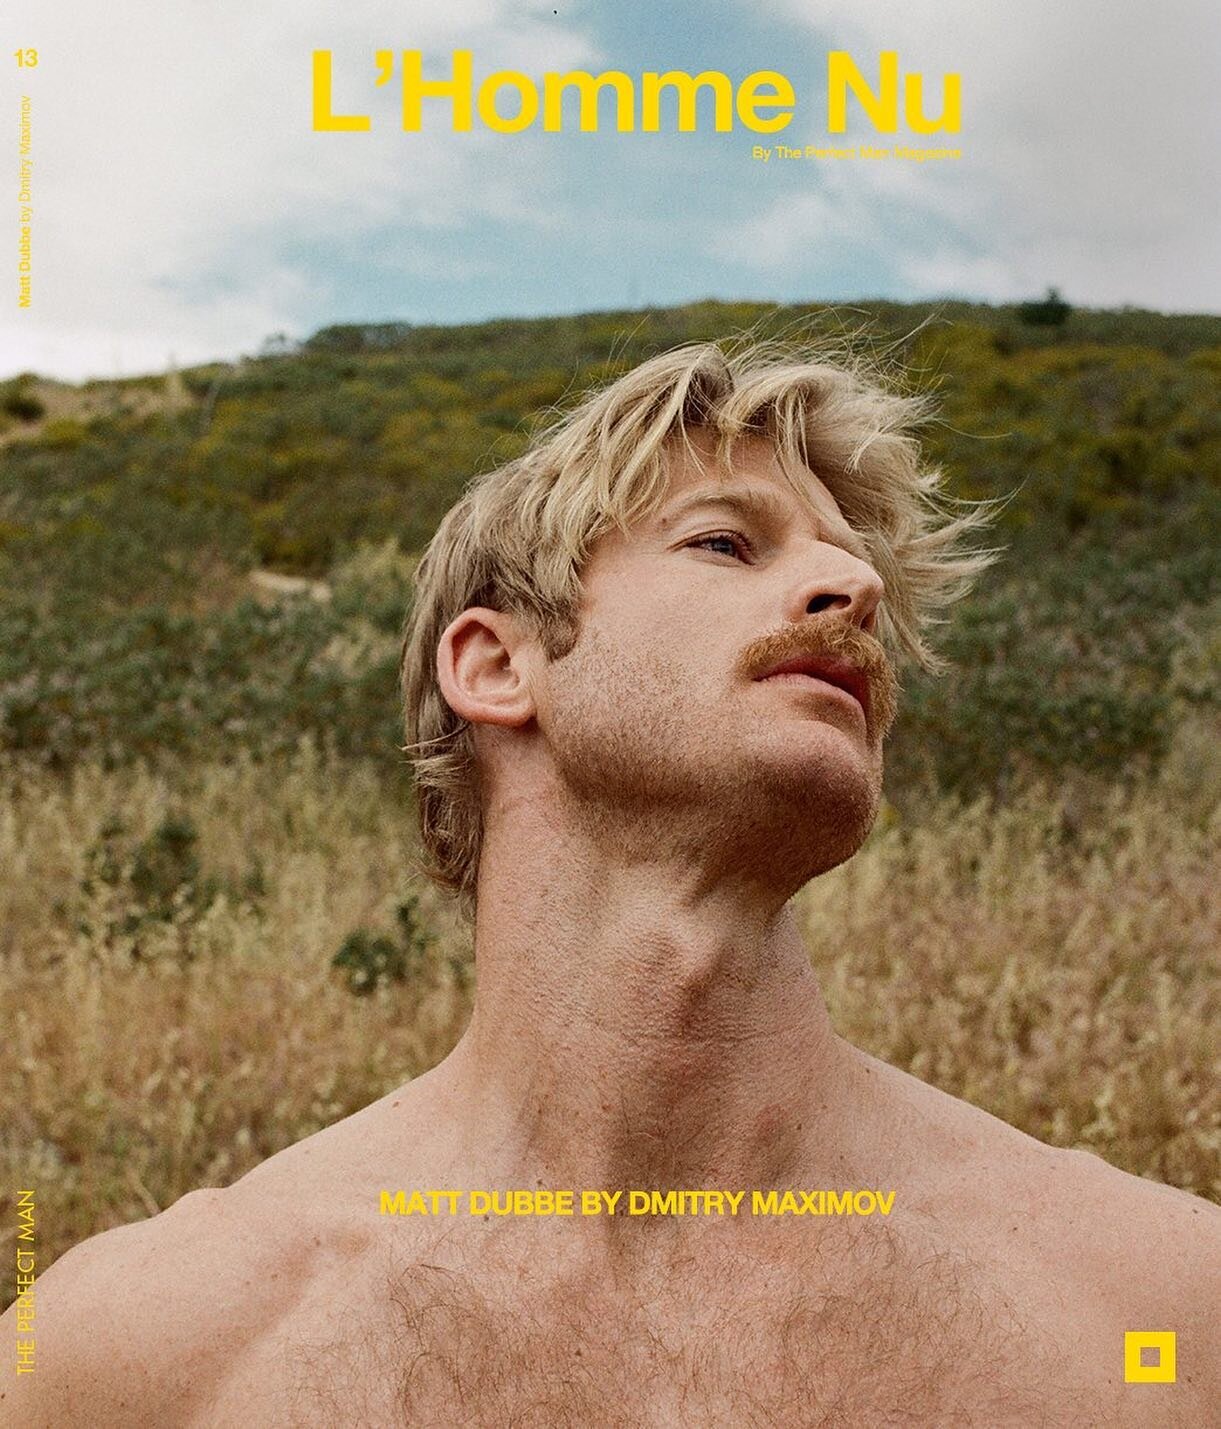 Field of Dreams: MATT DUBBE is a six-foot-two blonde god who happens to be a lover of the great outdoors. His swooping blonde hair and muscular frame brings to mind the nostalgia of 1960&rsquo;s physique magazines. In this L&rsquo;Homme Nu pictorial 